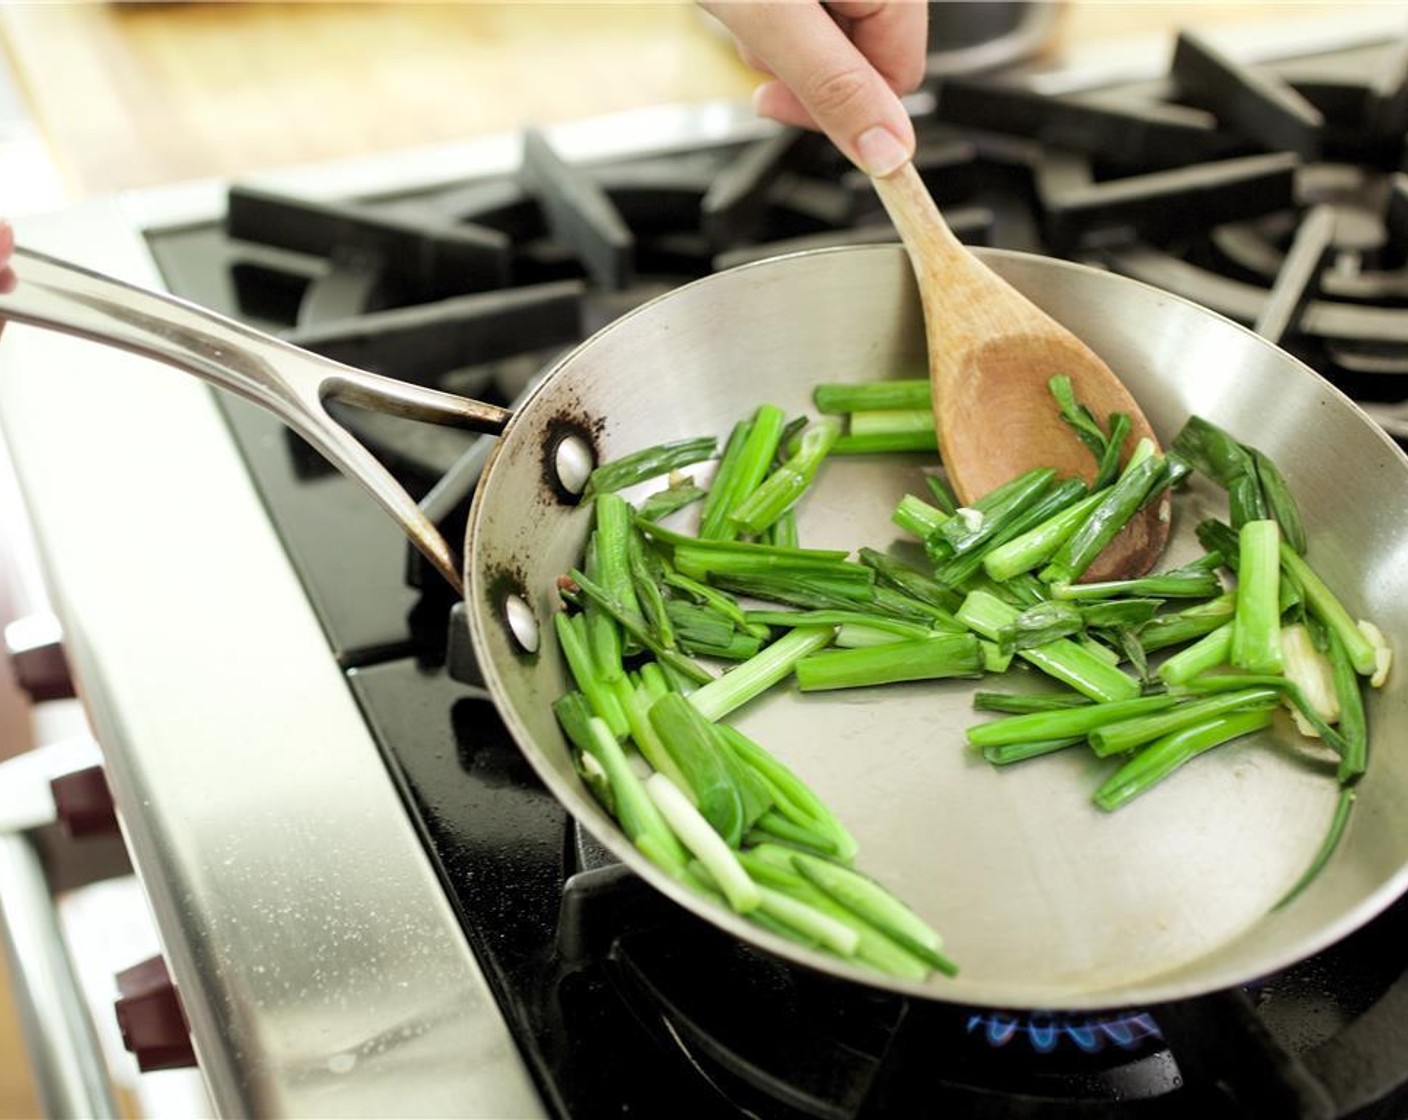 step 6 In a large saute pan over medium high heat, add one tablespoon of olive oil. Saute garlic and green onions for two minutes. Remove green onions from pan and set aside.